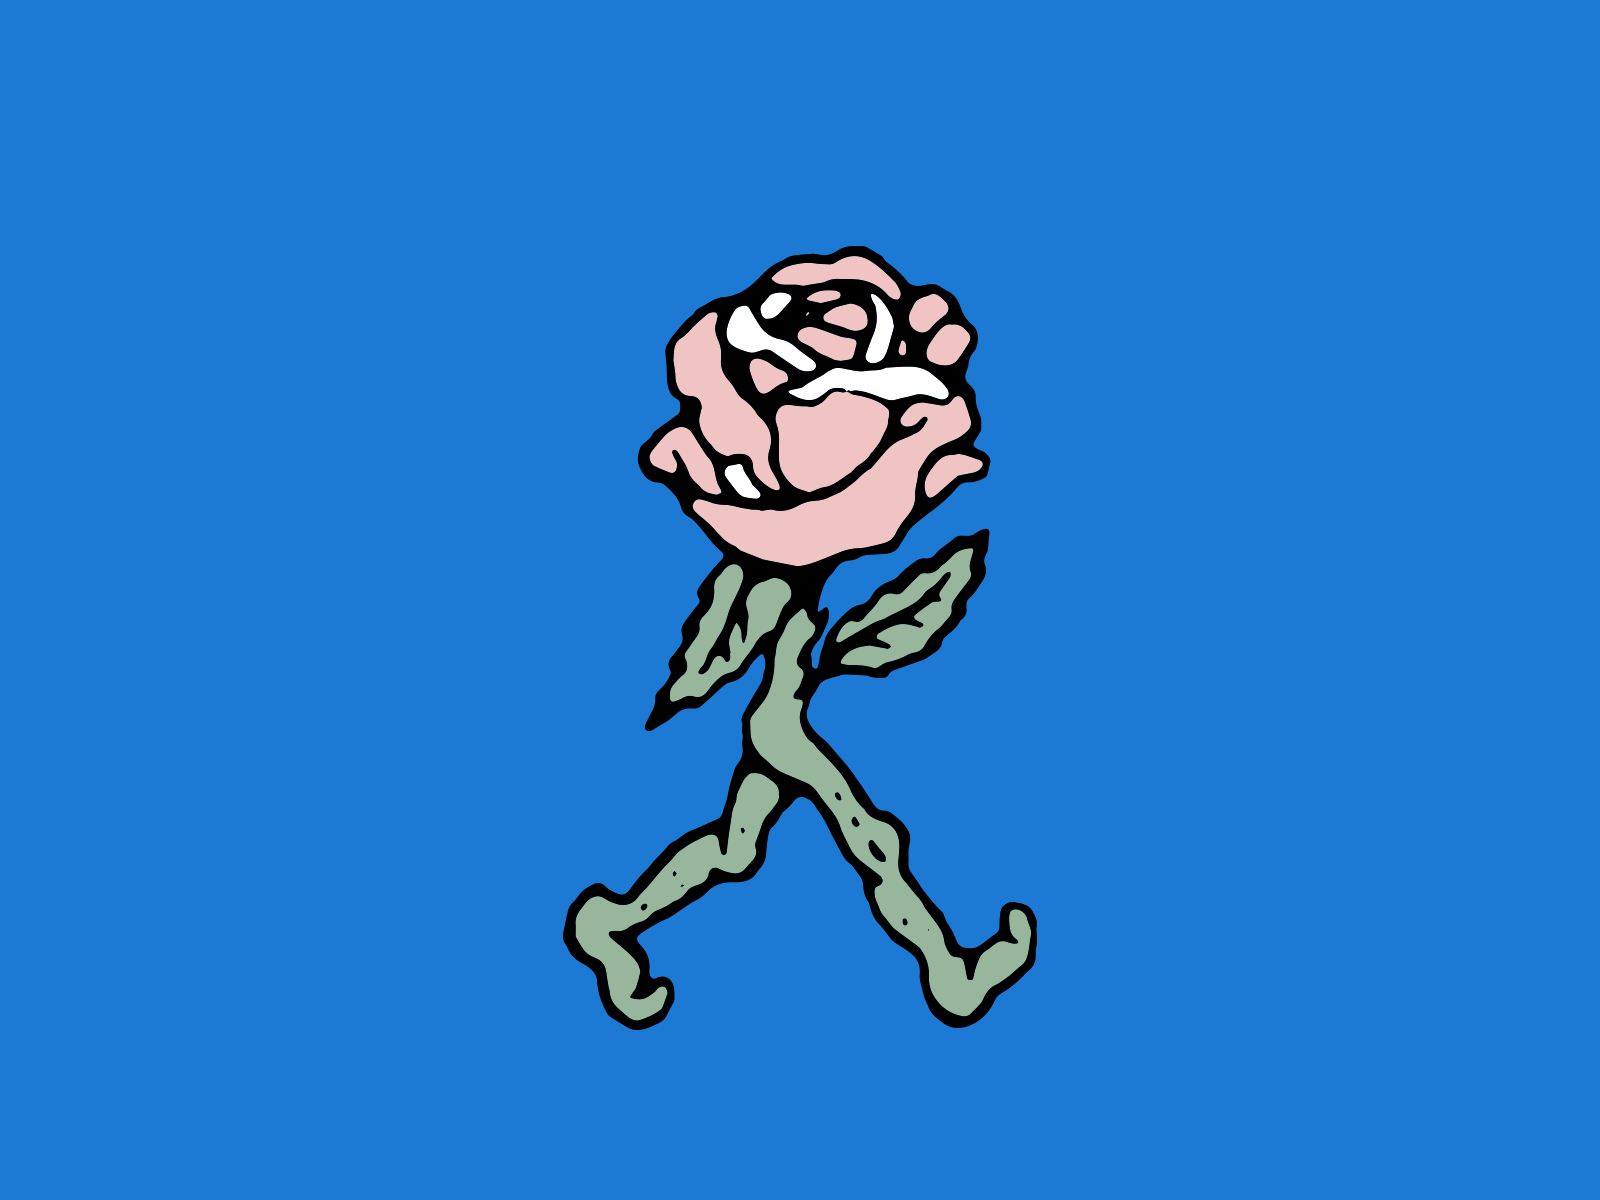 Rose Walk 2D Animation by Pat Rogasch on Dribbble